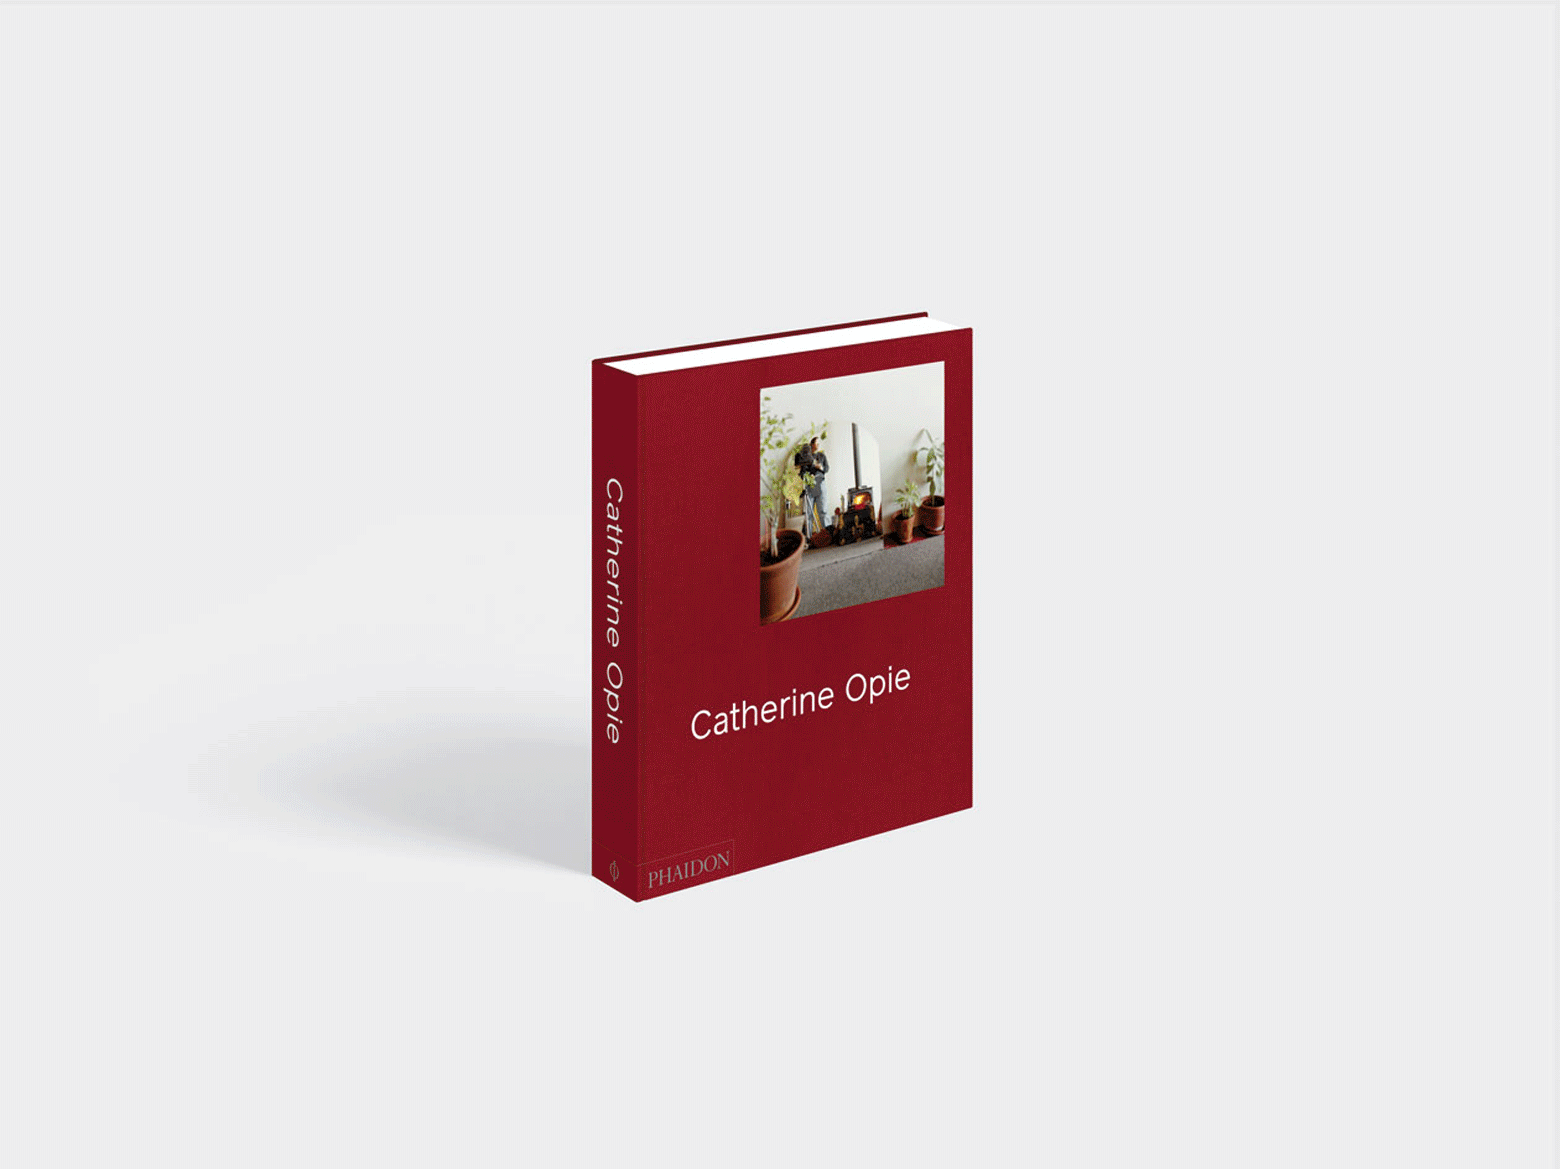 Catherine Opie new monograph published by Phaidon